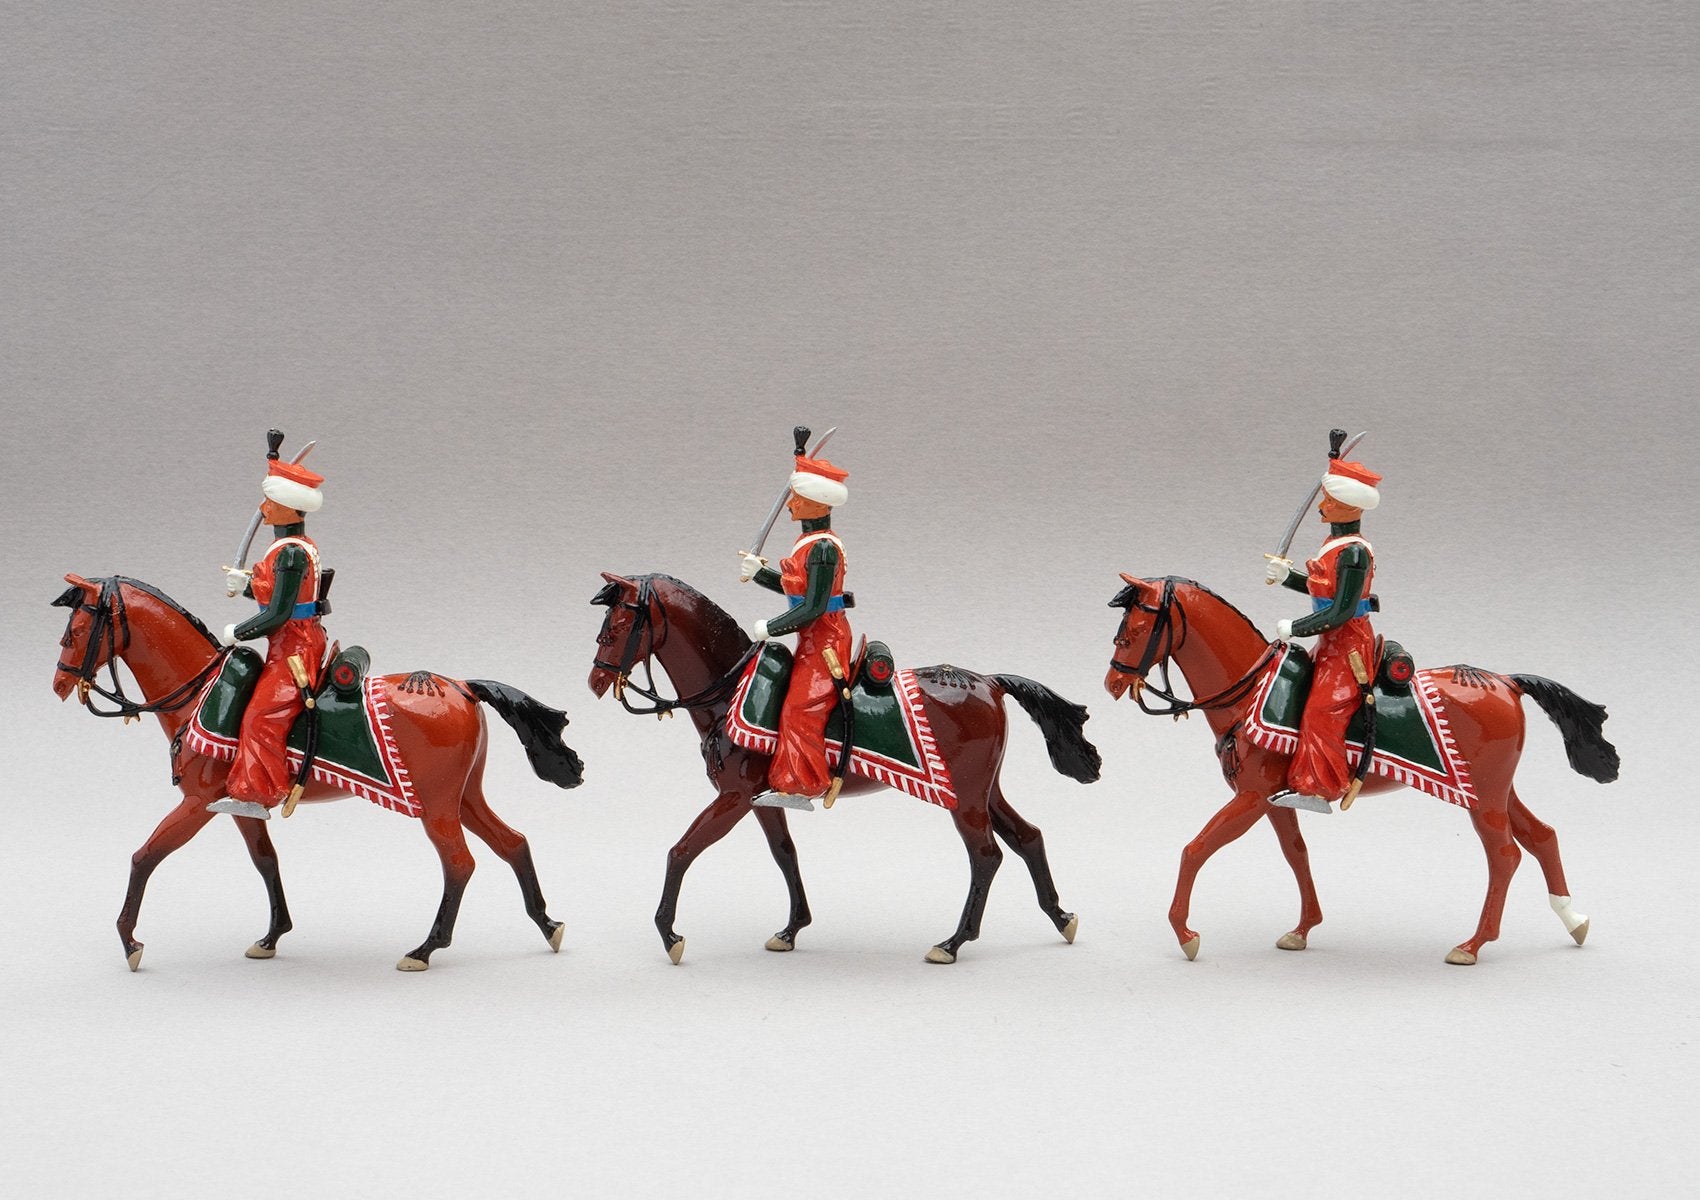 Set 117 Marmelukes | French Cavalry | Napoleonic Wars | Three mounted cavalry figures. Their uniform is of Syrian and Turkish Mameluke pattern; turban, sleeved chemise, arab sash, charoual-style trousers, and Mameluke sabre | Waterloo | © Imperial Productions | Sculpt by David Cowe